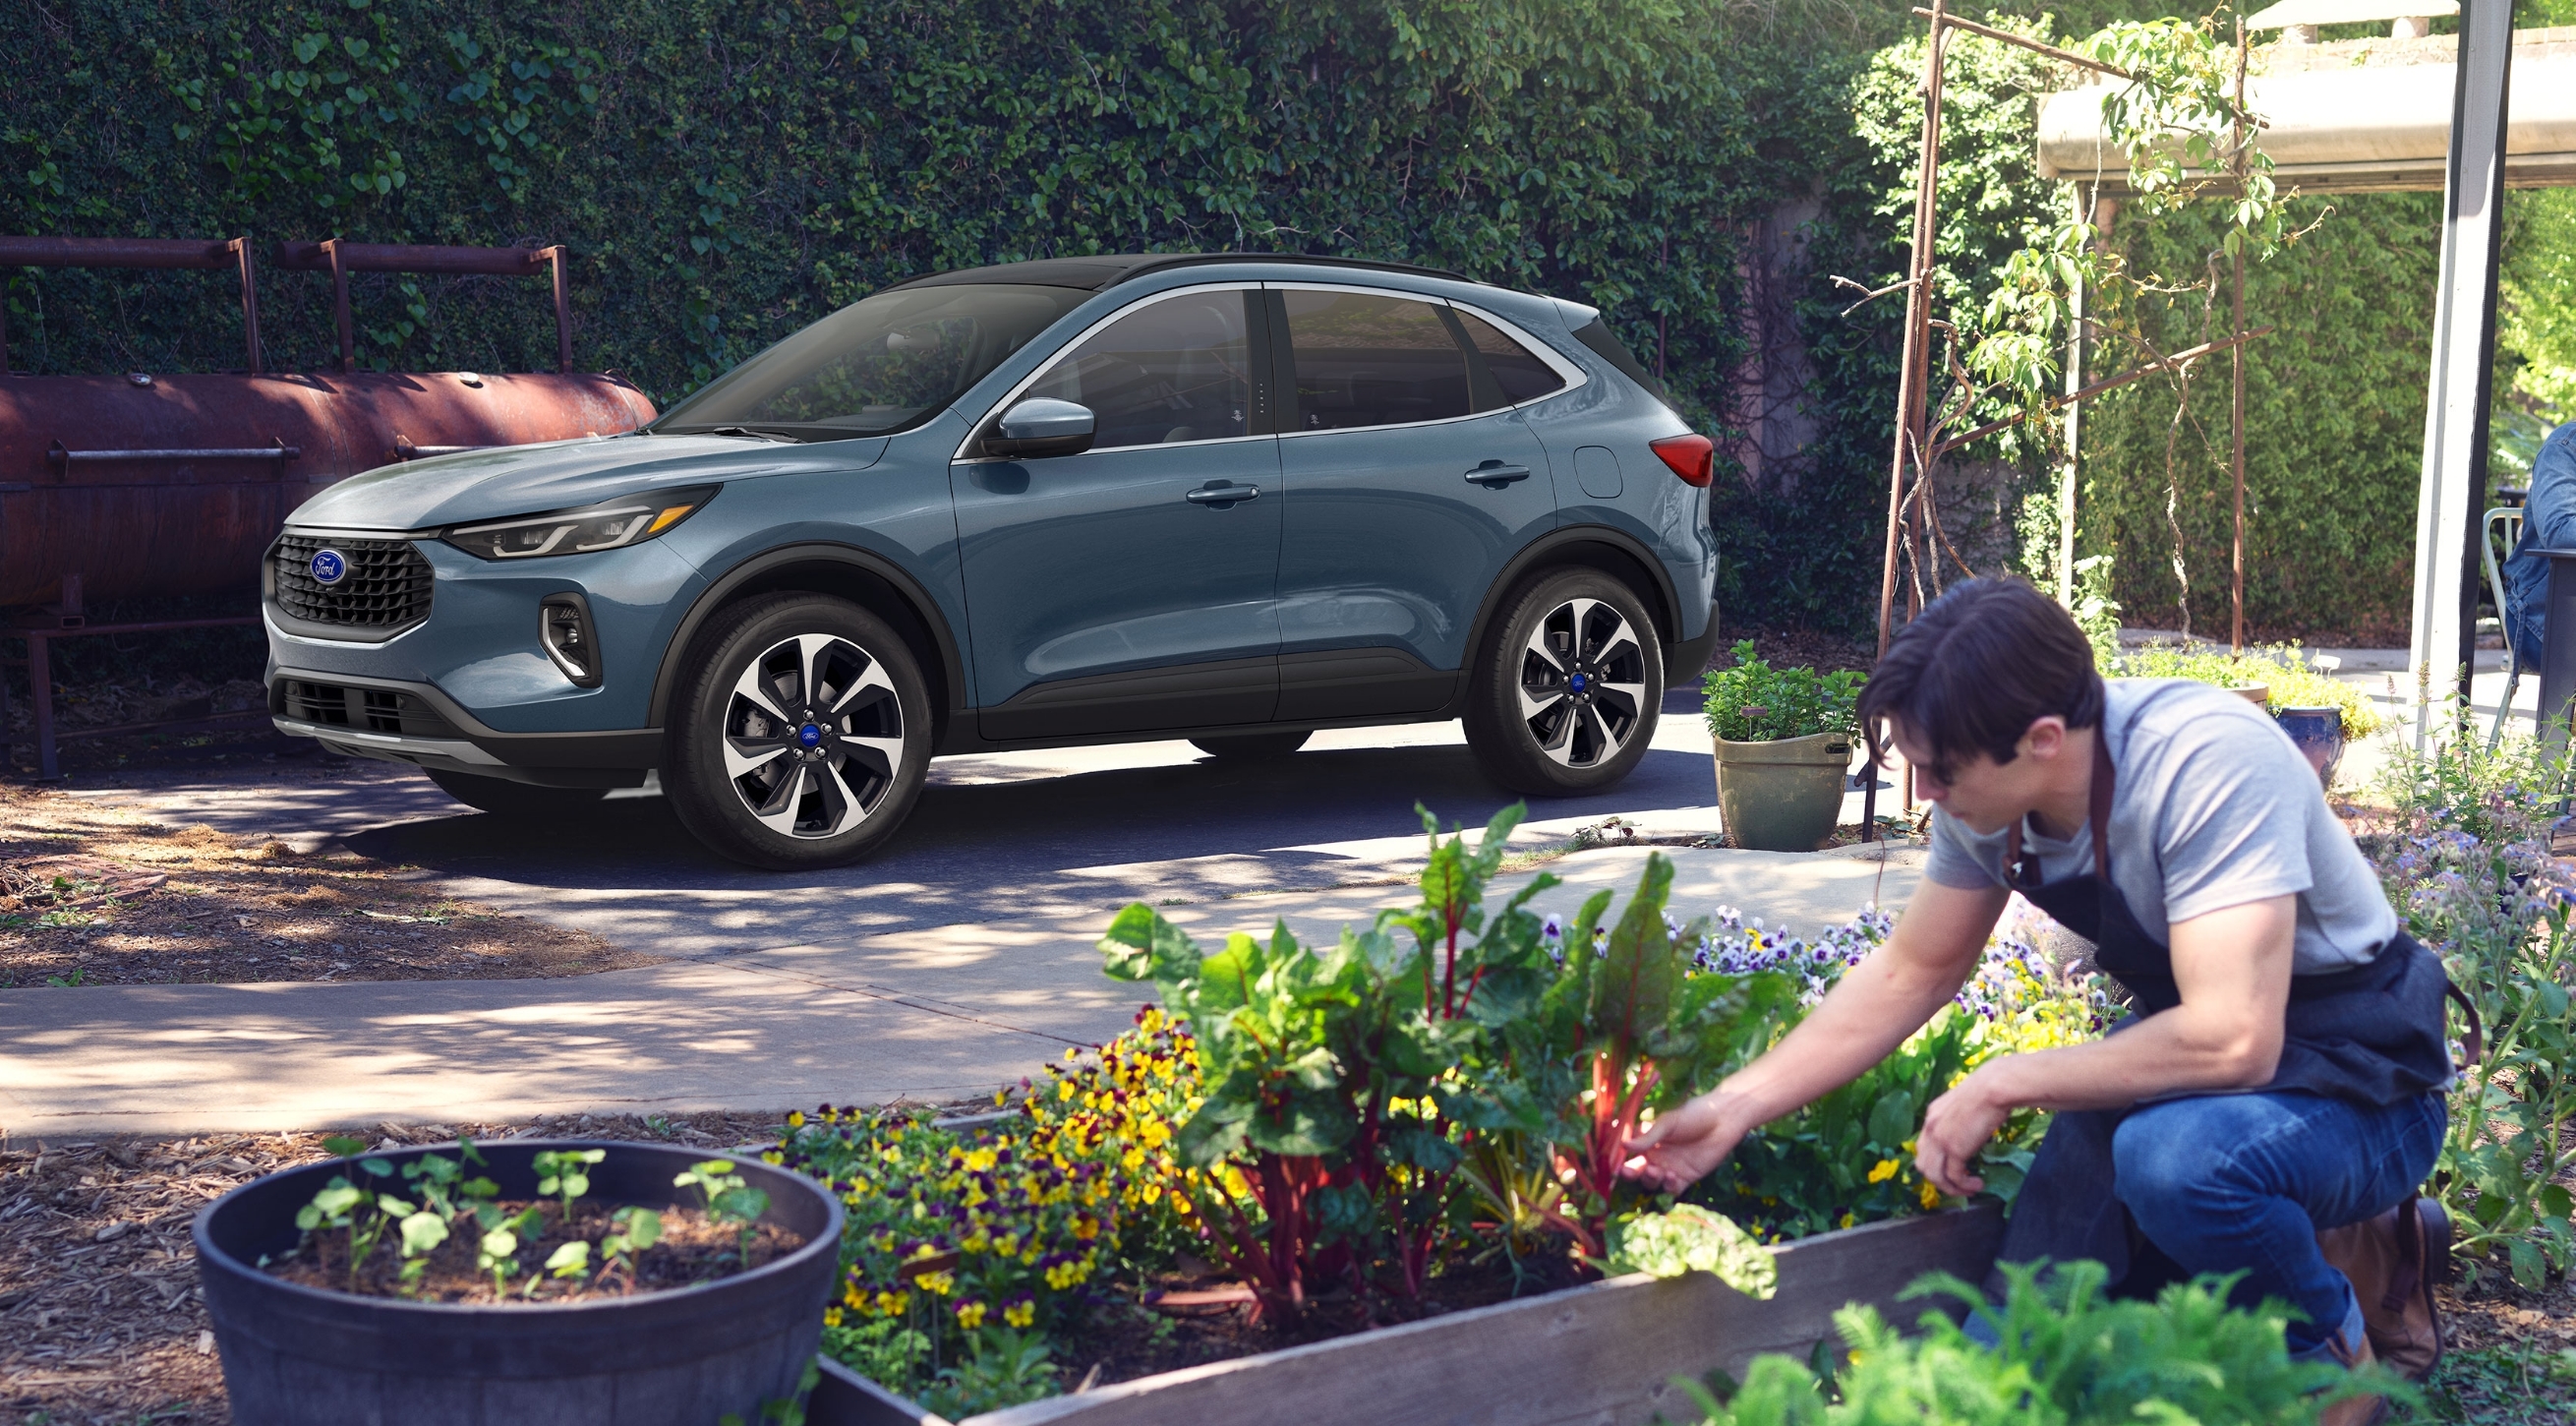 Young male kneeling down viewing garden with new 2023 Ford SUV parked in background